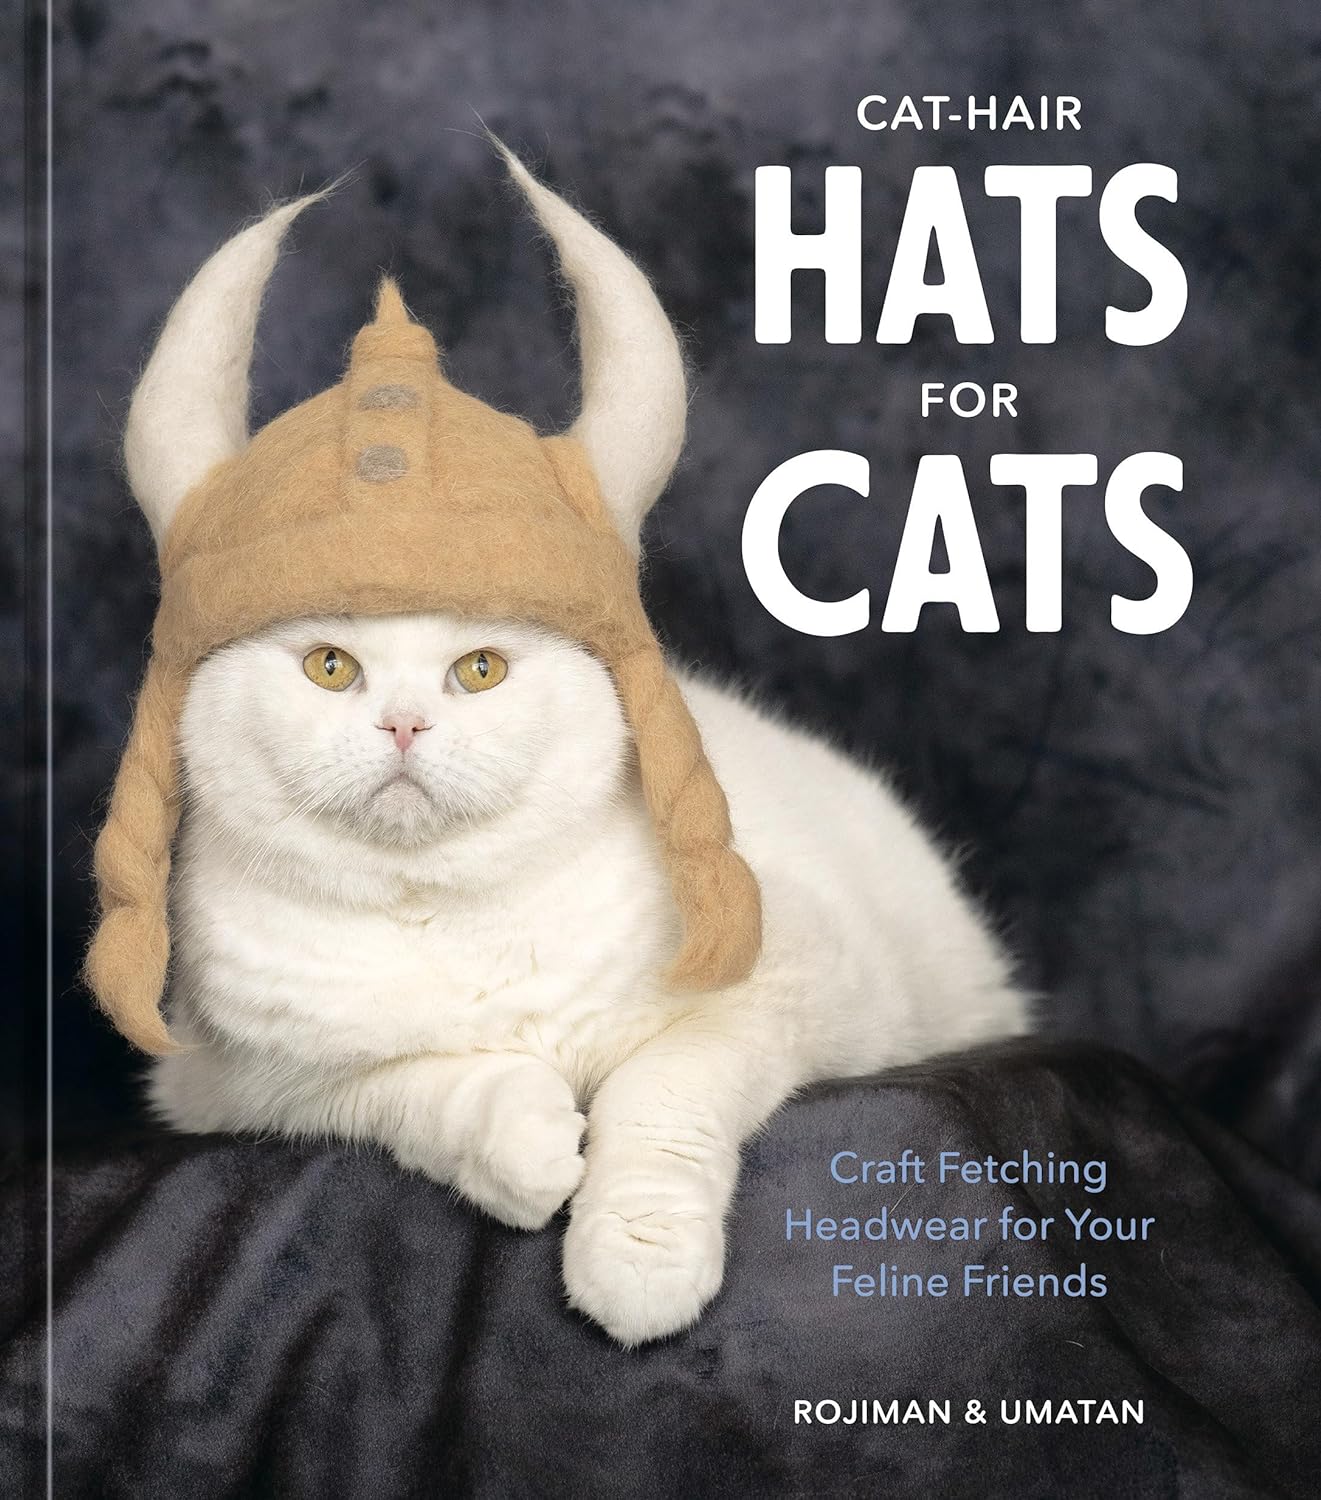 Cat-Hat: Hats for Cats